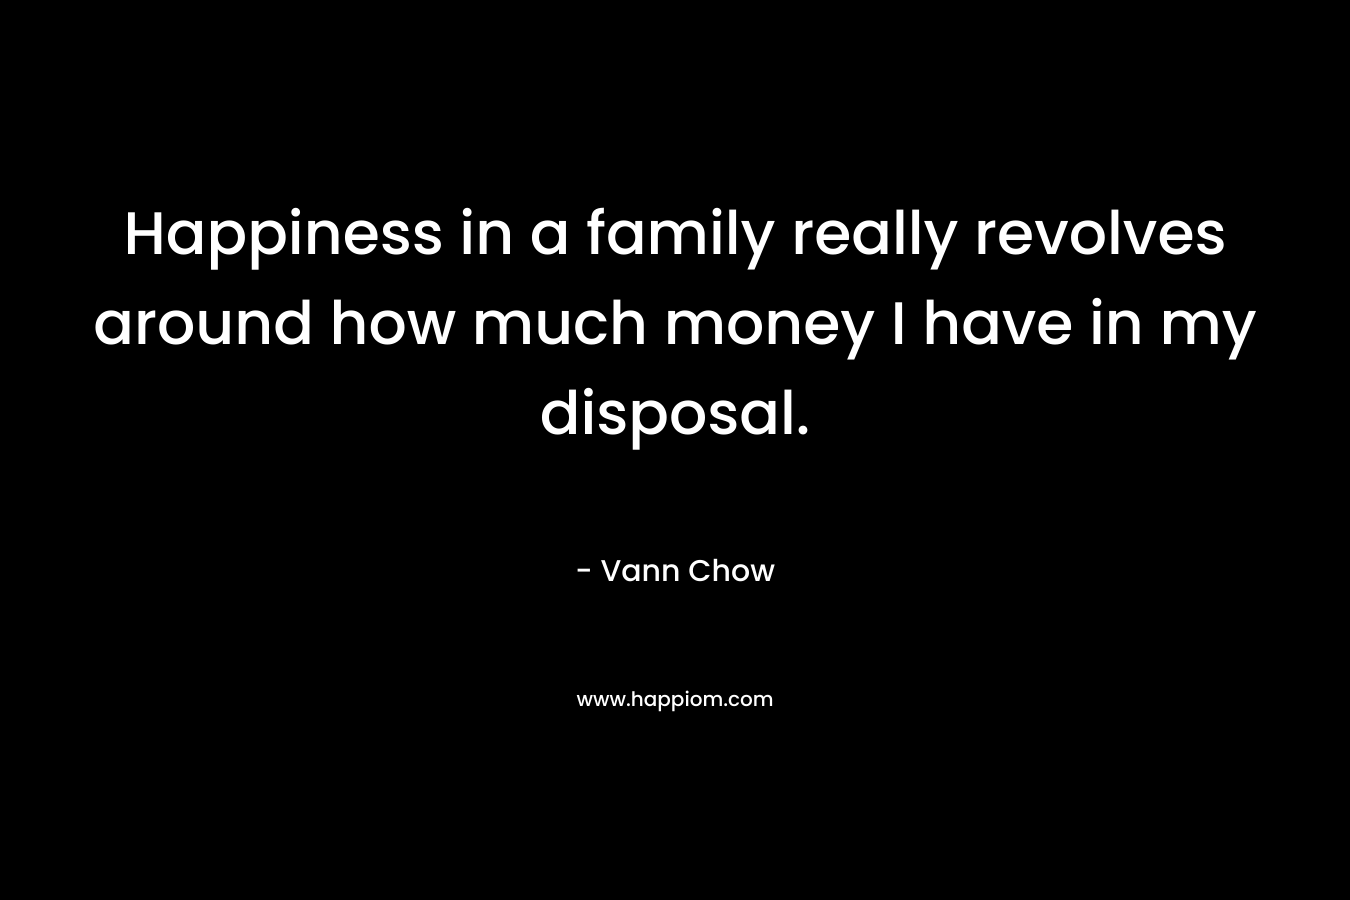 Happiness in a family really revolves around how much money I have in my disposal. – Vann Chow